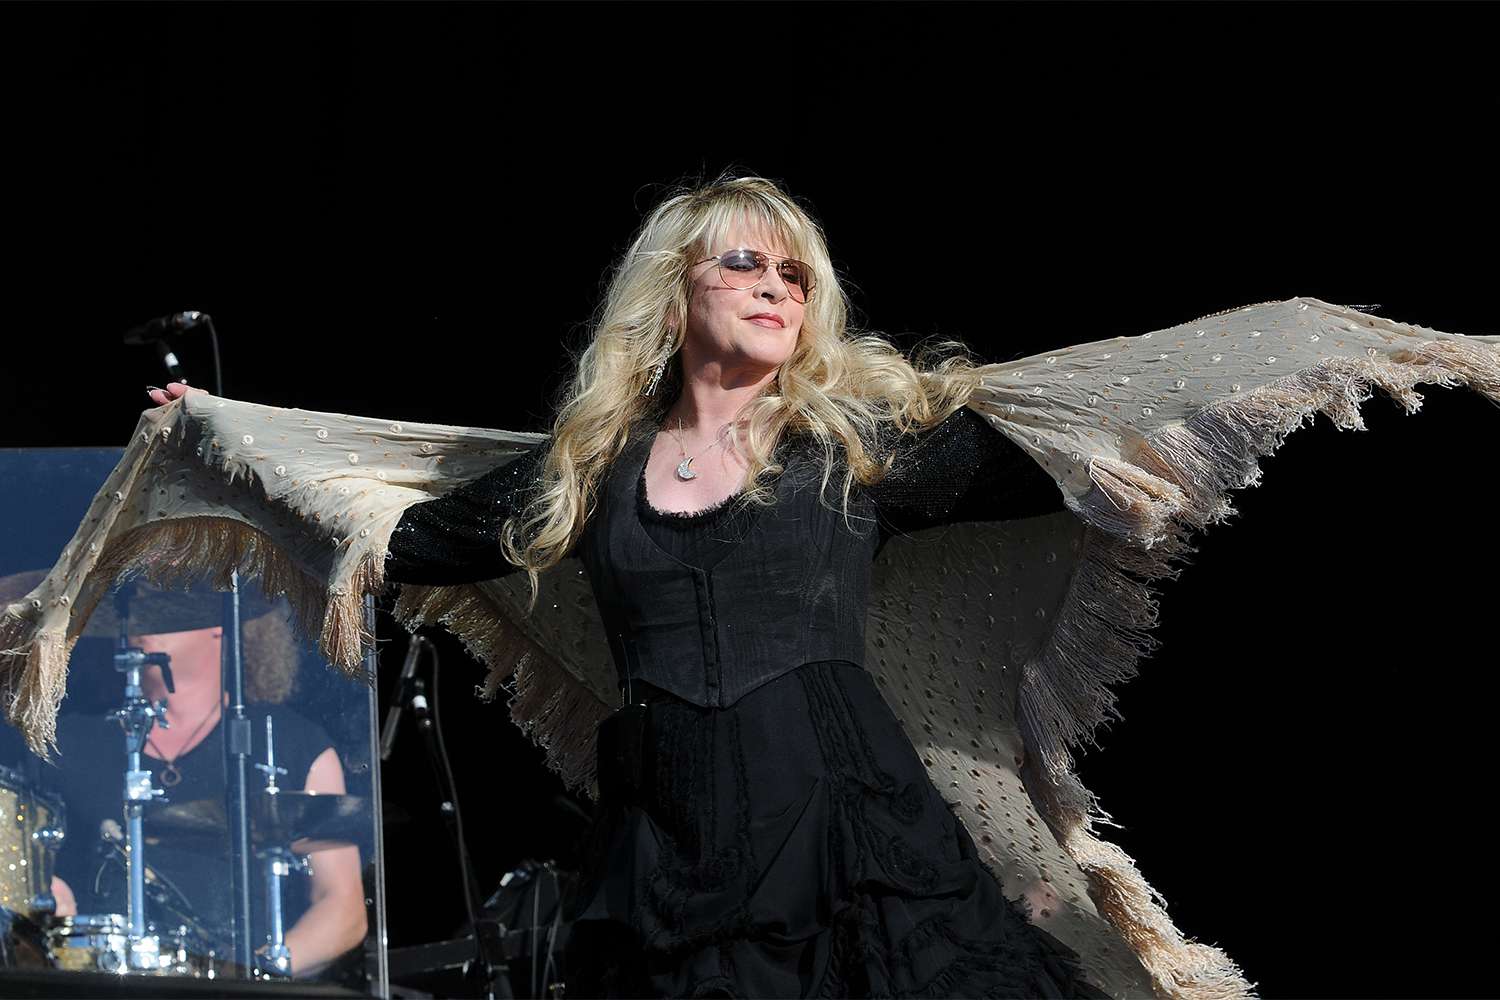 Stevie Nicks performs live on stage during the third day of the 'Hard Rock Calling' music festival at Hyde Park on June 26, 2011 in central London, England.